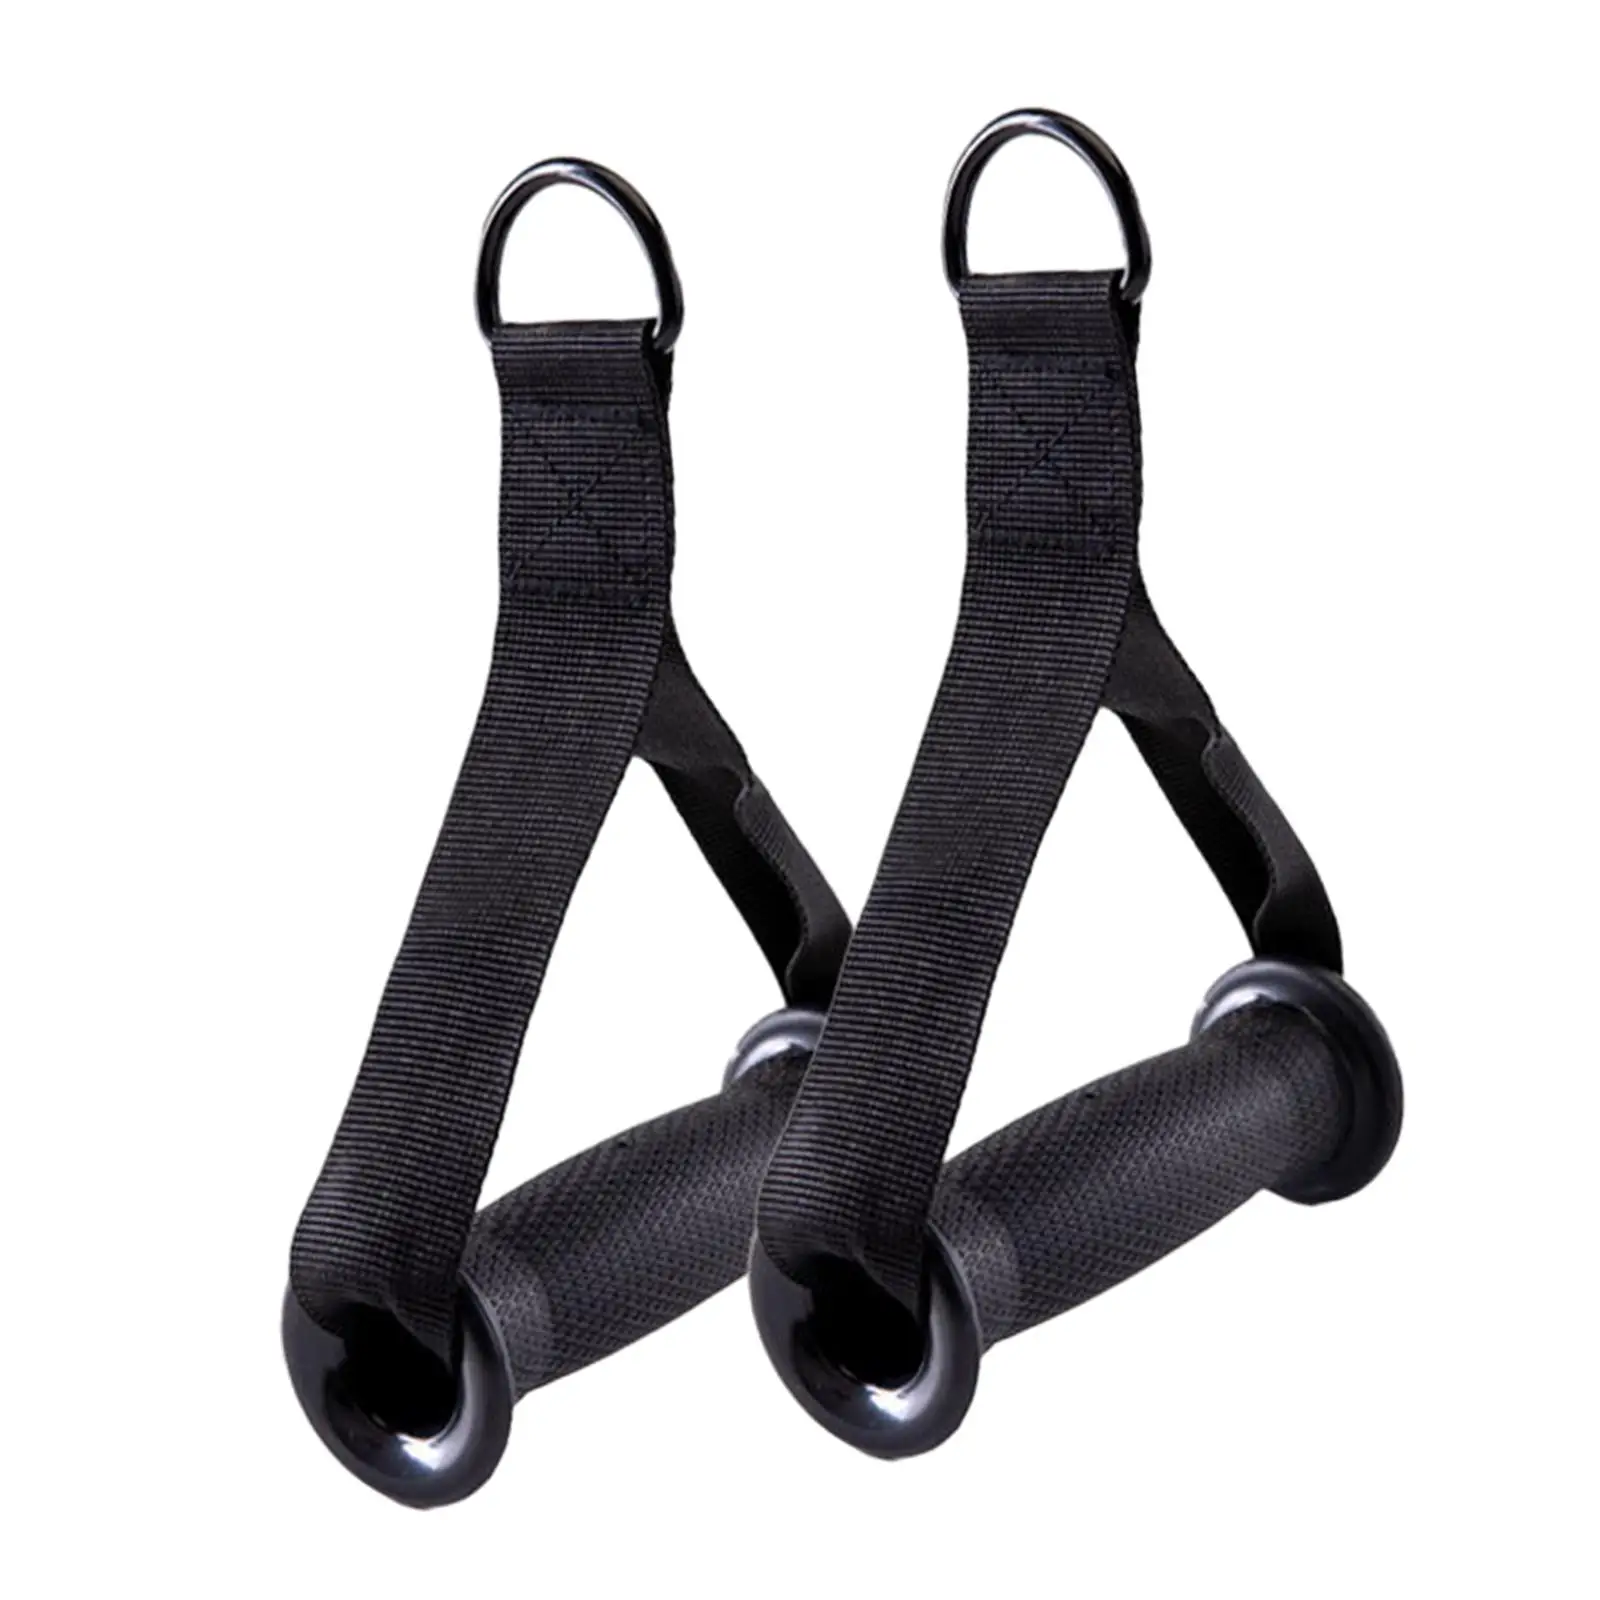 Exercise Handles Grip Attachments for Home Gym Equipment Yoga Pulley System